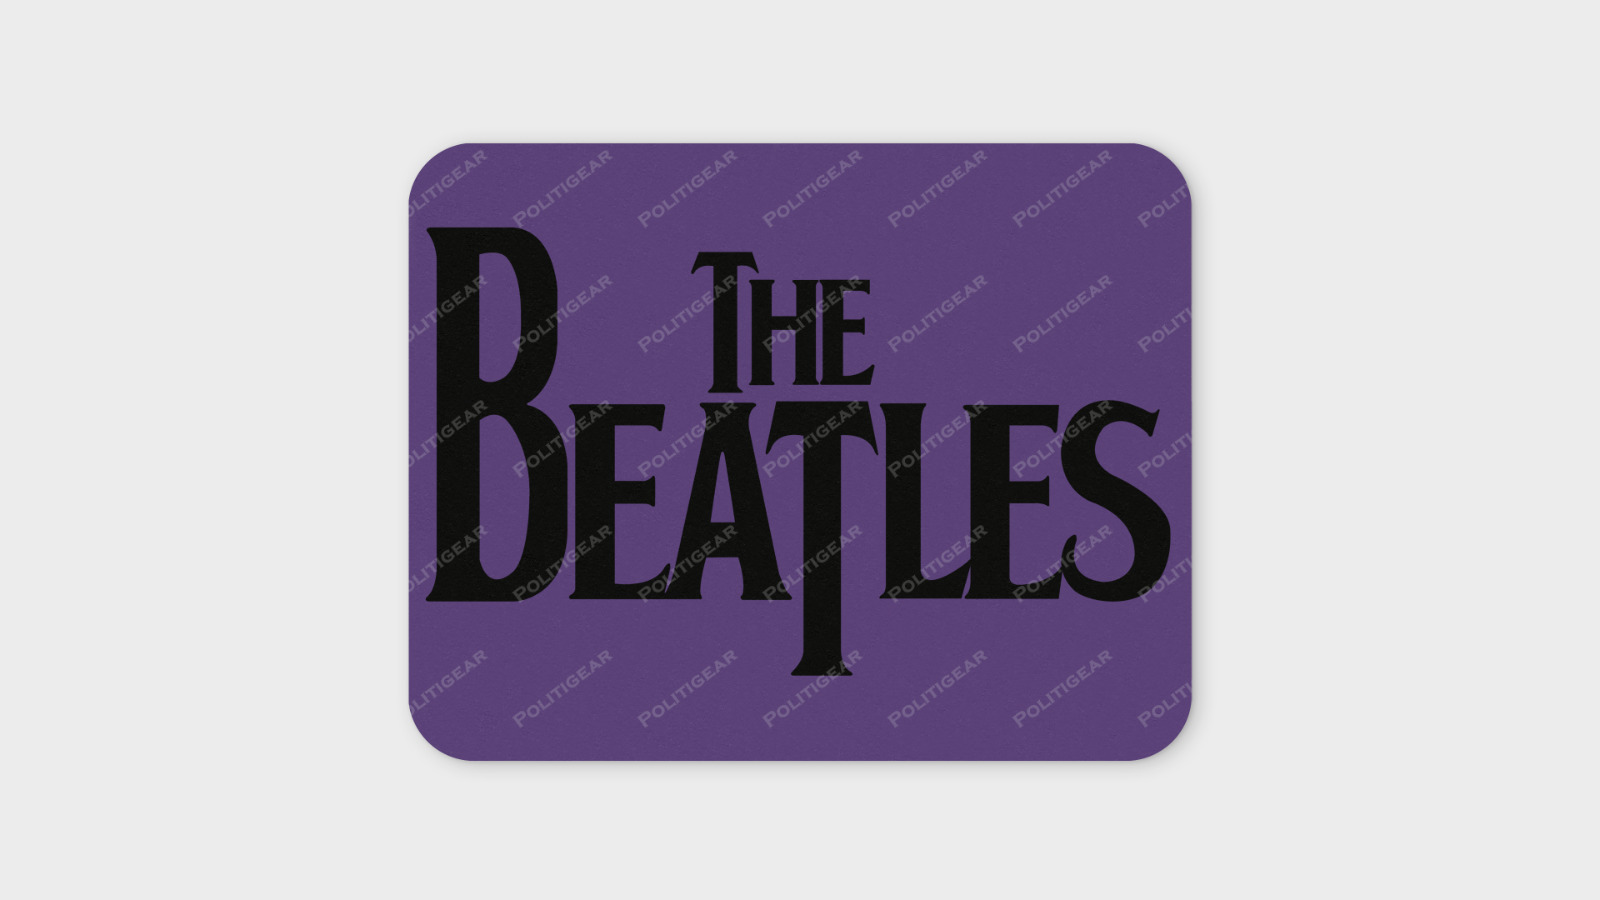 \'The Beatles\' Logo Mouse Pad 3mm